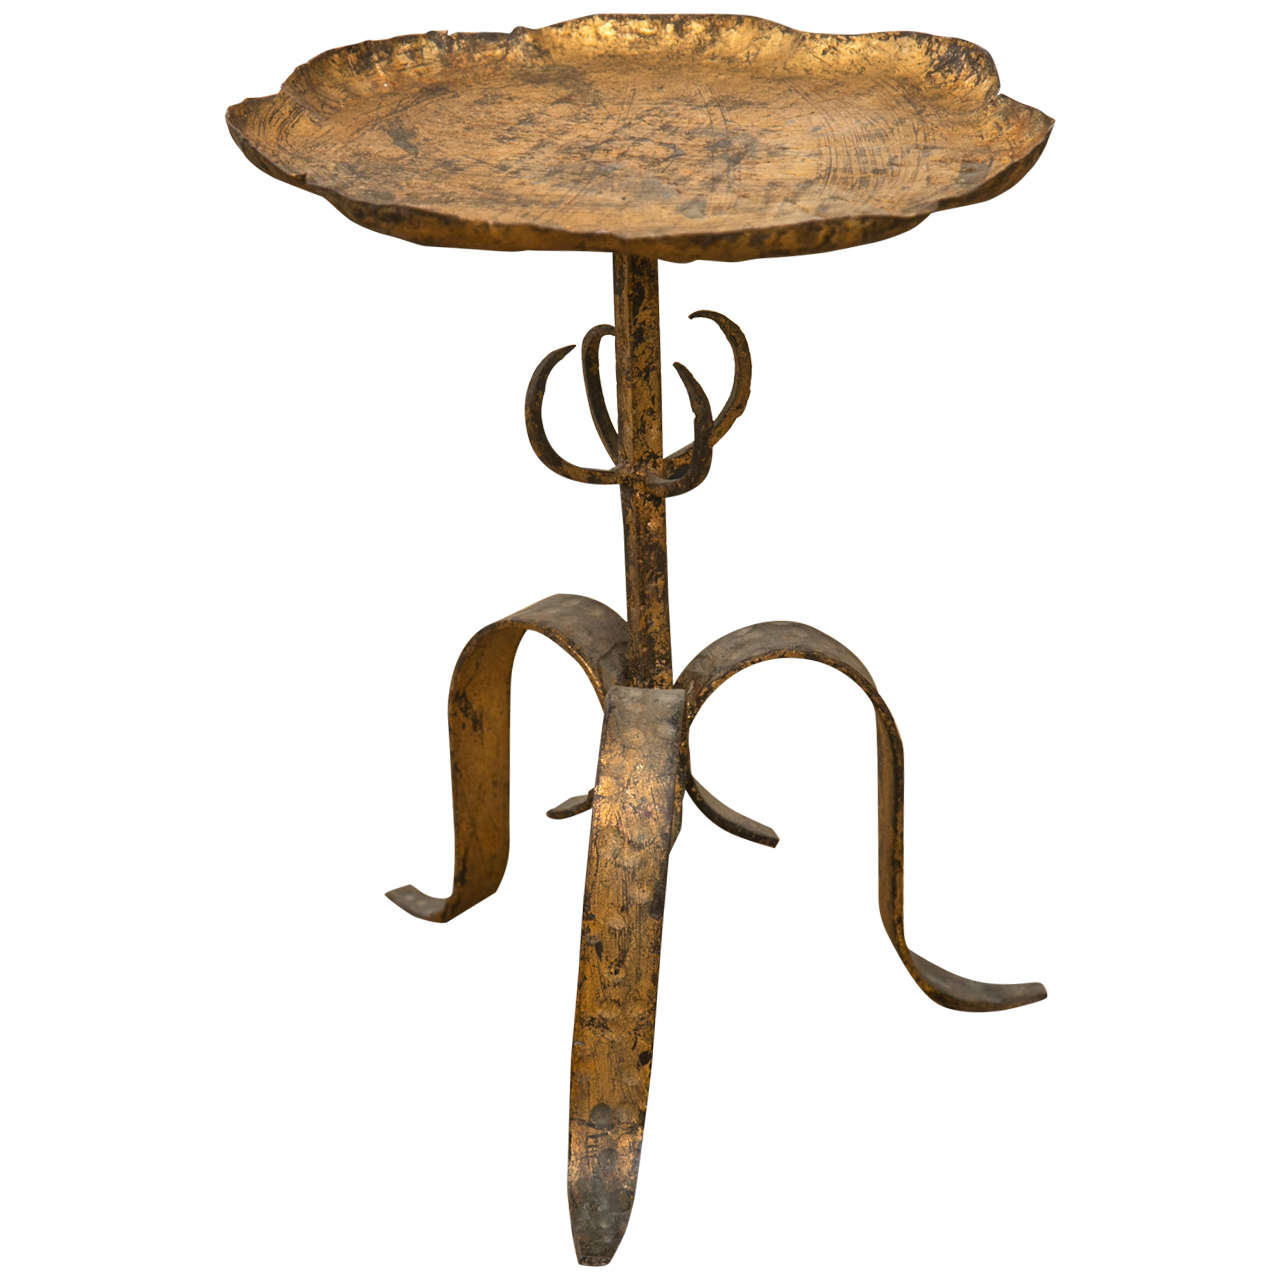 Petite French Gilt Metal Flower Form Gueridon Table